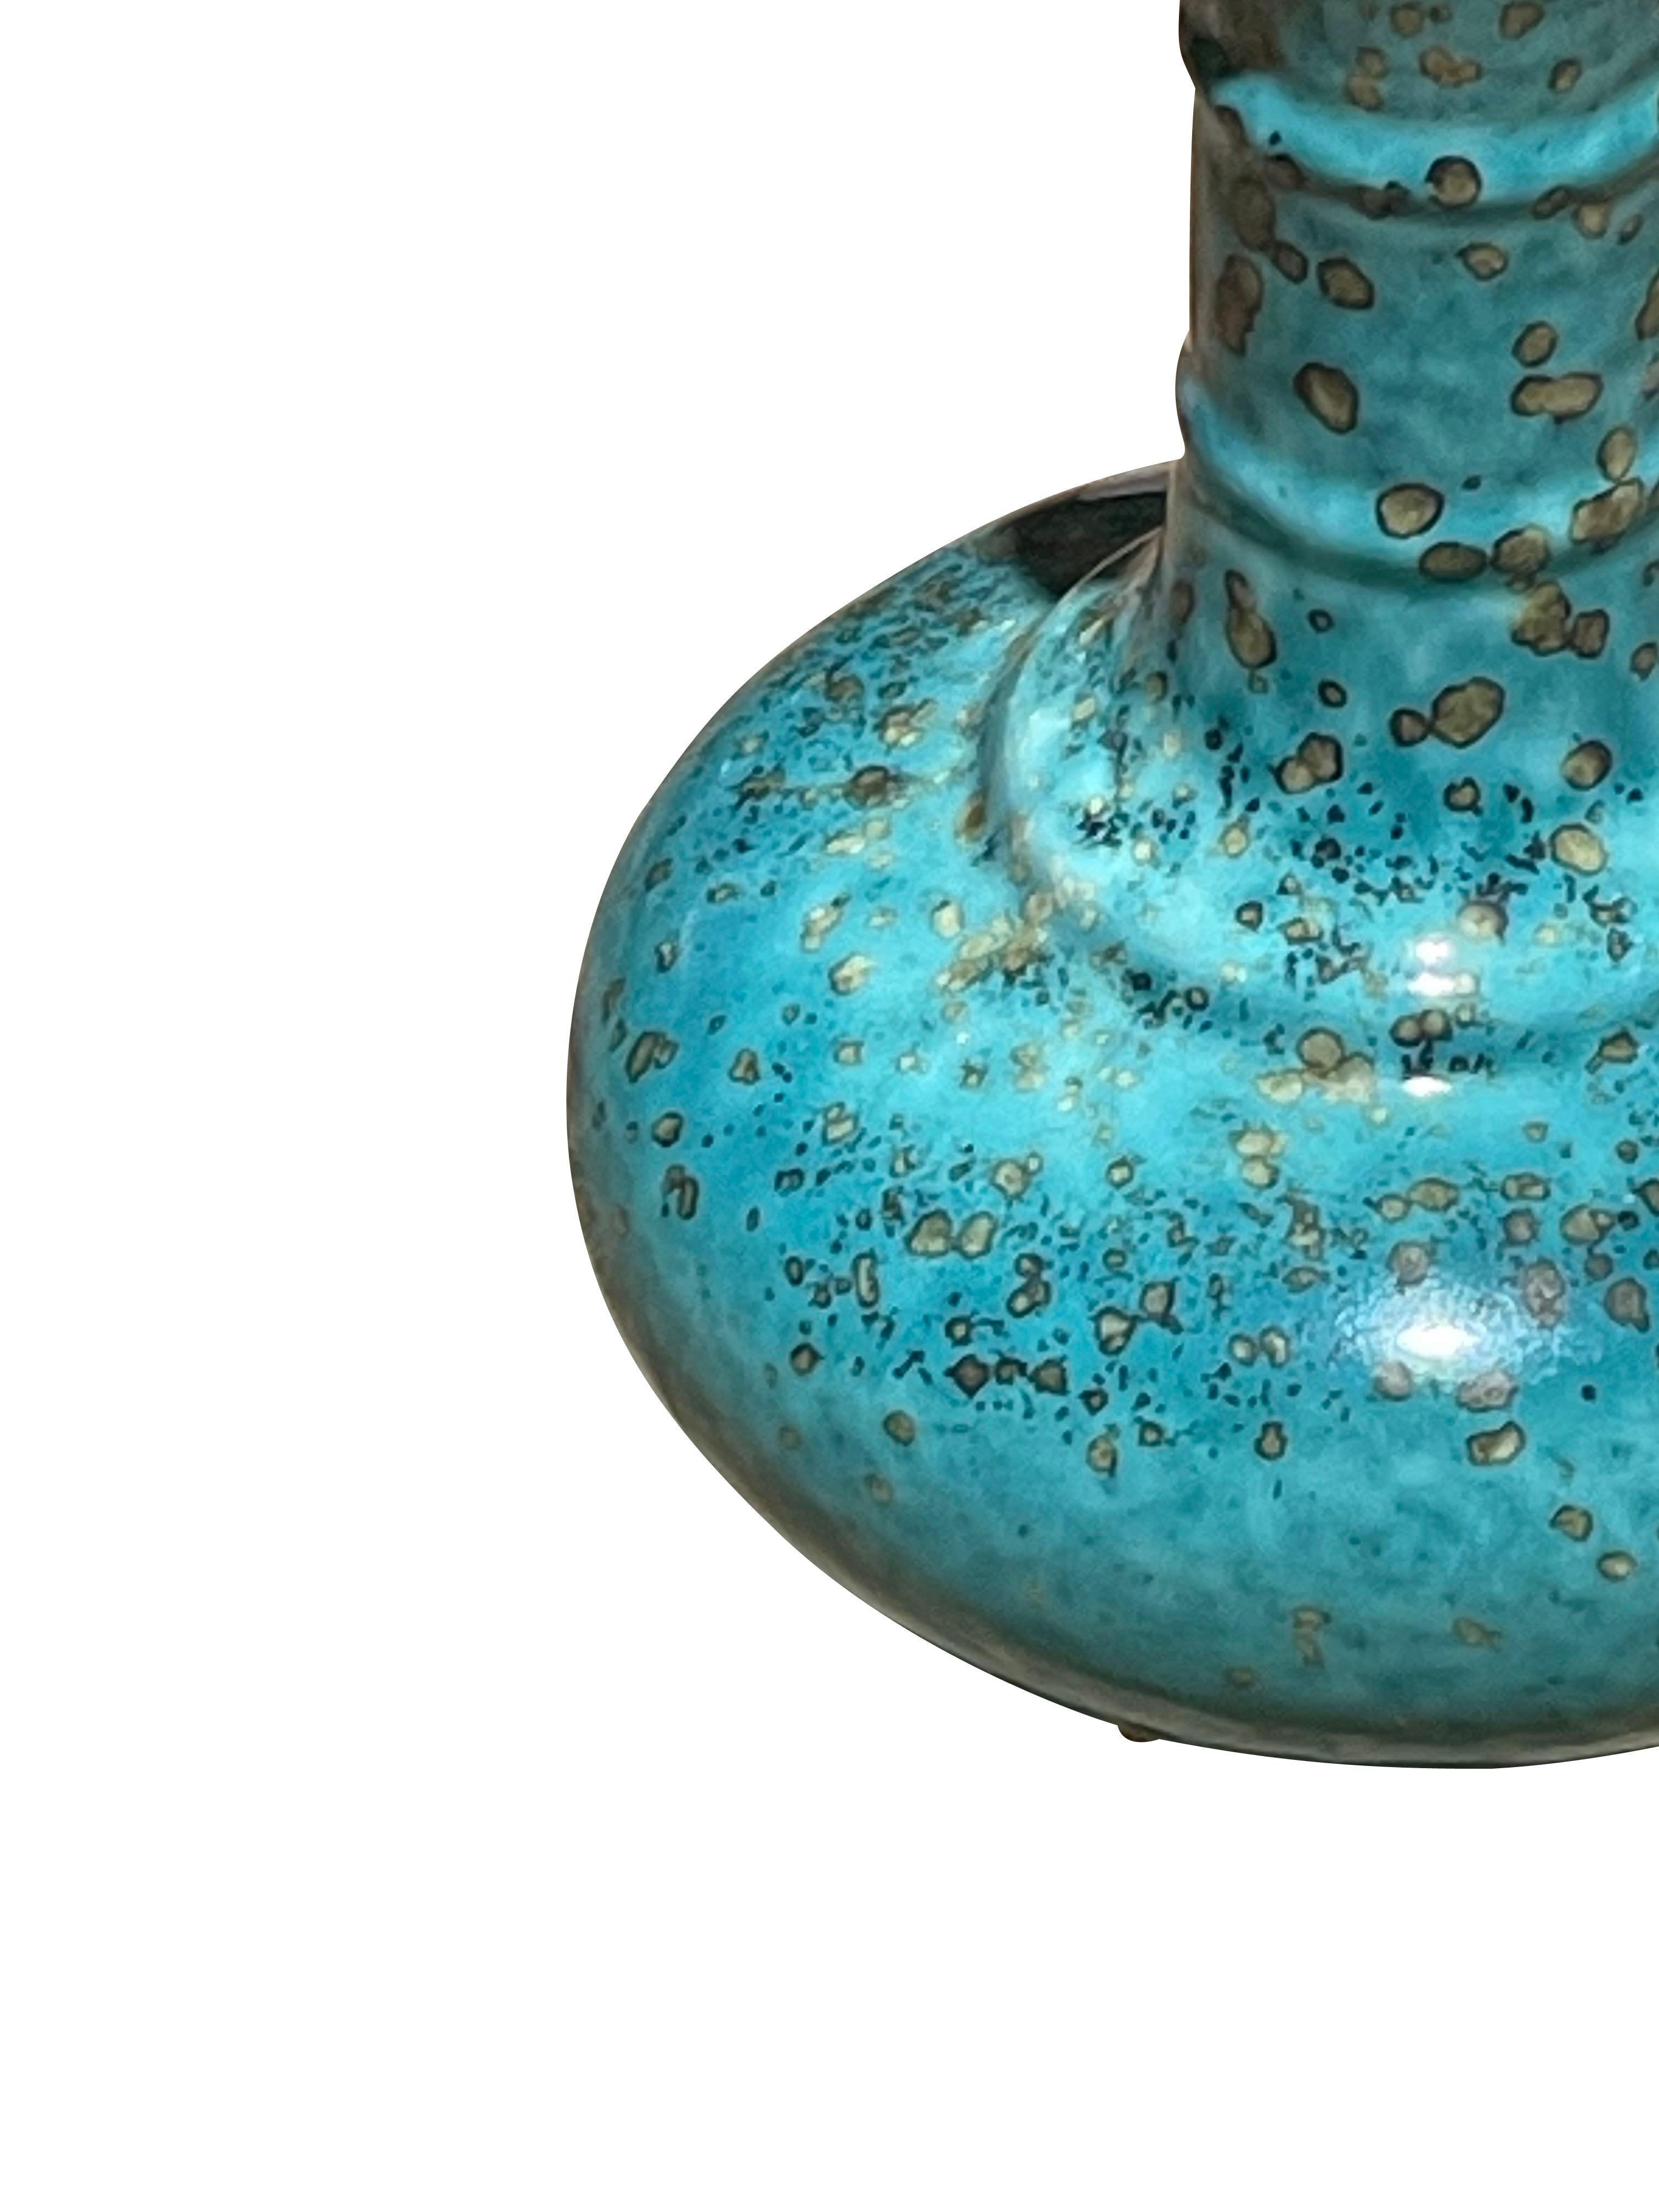 Chinese Turquoise with Gold Accents Short with Raised Rib Neck Vase, China